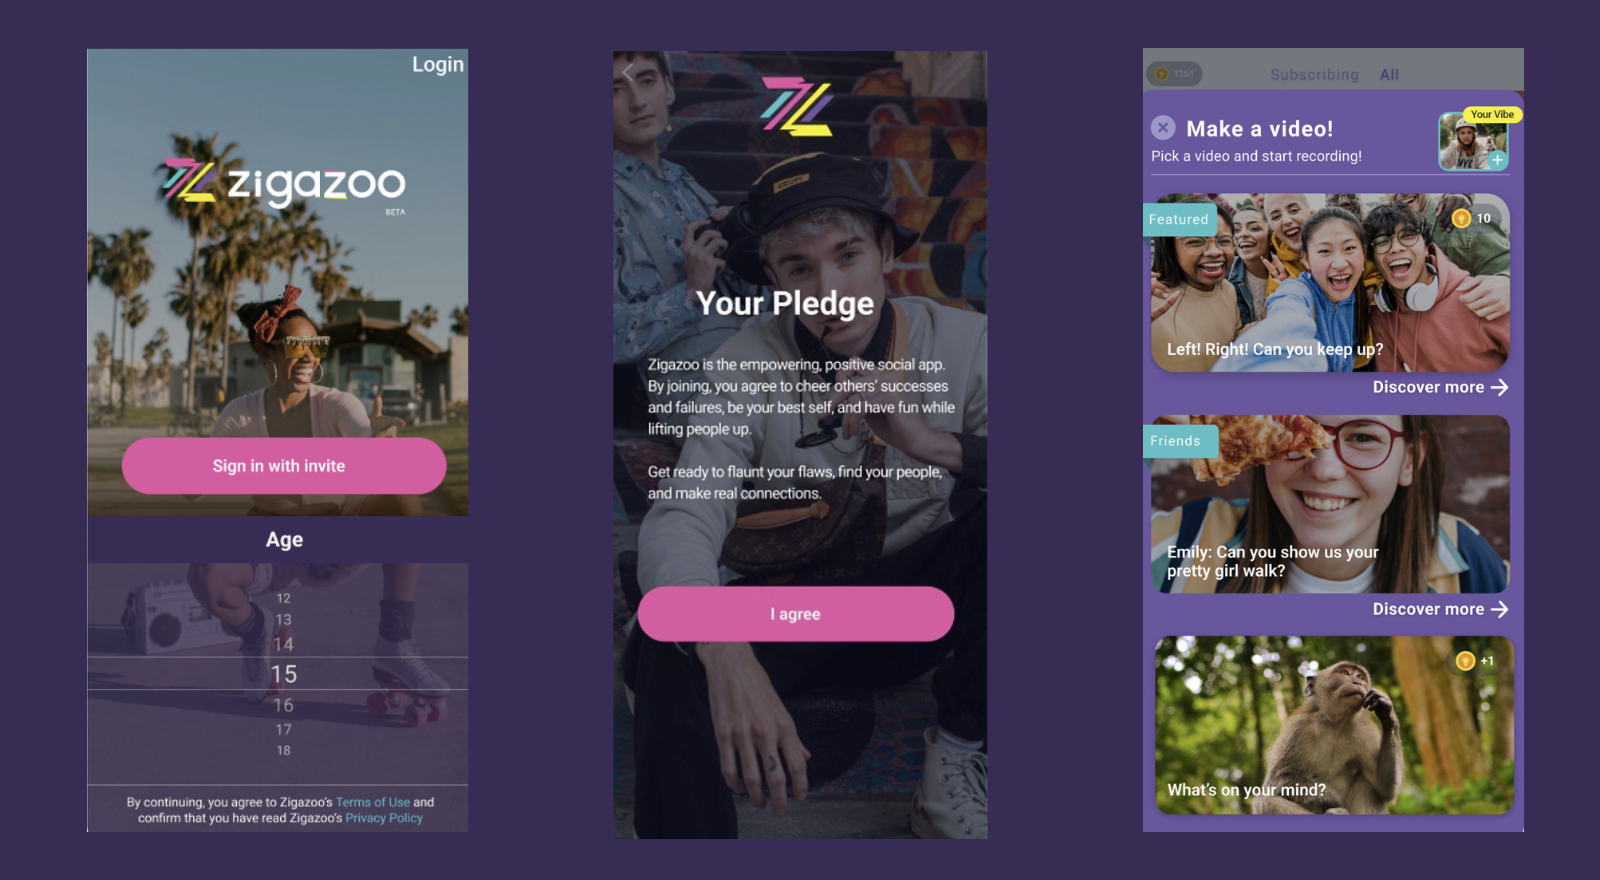 Kid-focused short video app Zigazoo launches a TikTok competitor for Gen Z